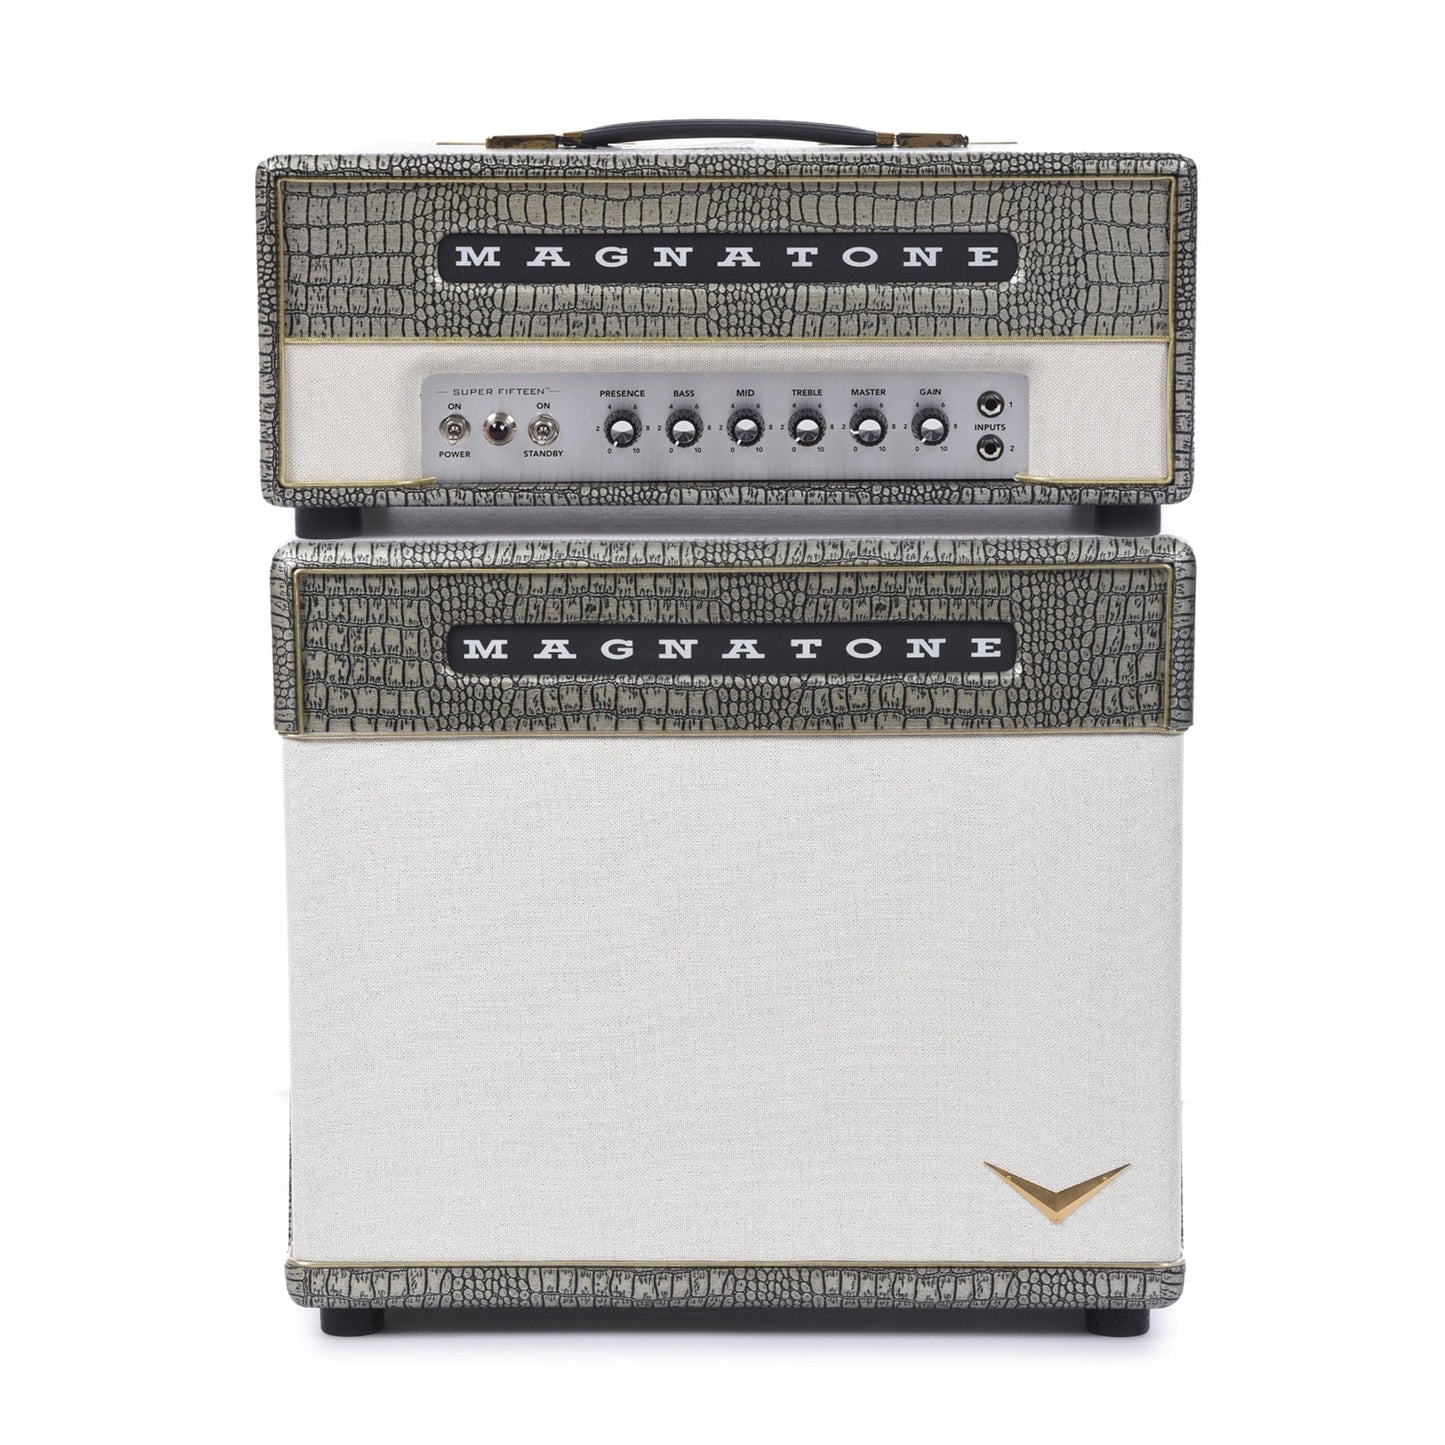 Magnatone Super Fifteen 15w Head Croc Collection Gold and 1x12" Super Fifteen Extension Cabinet Bundle Amps / Guitar Cabinets